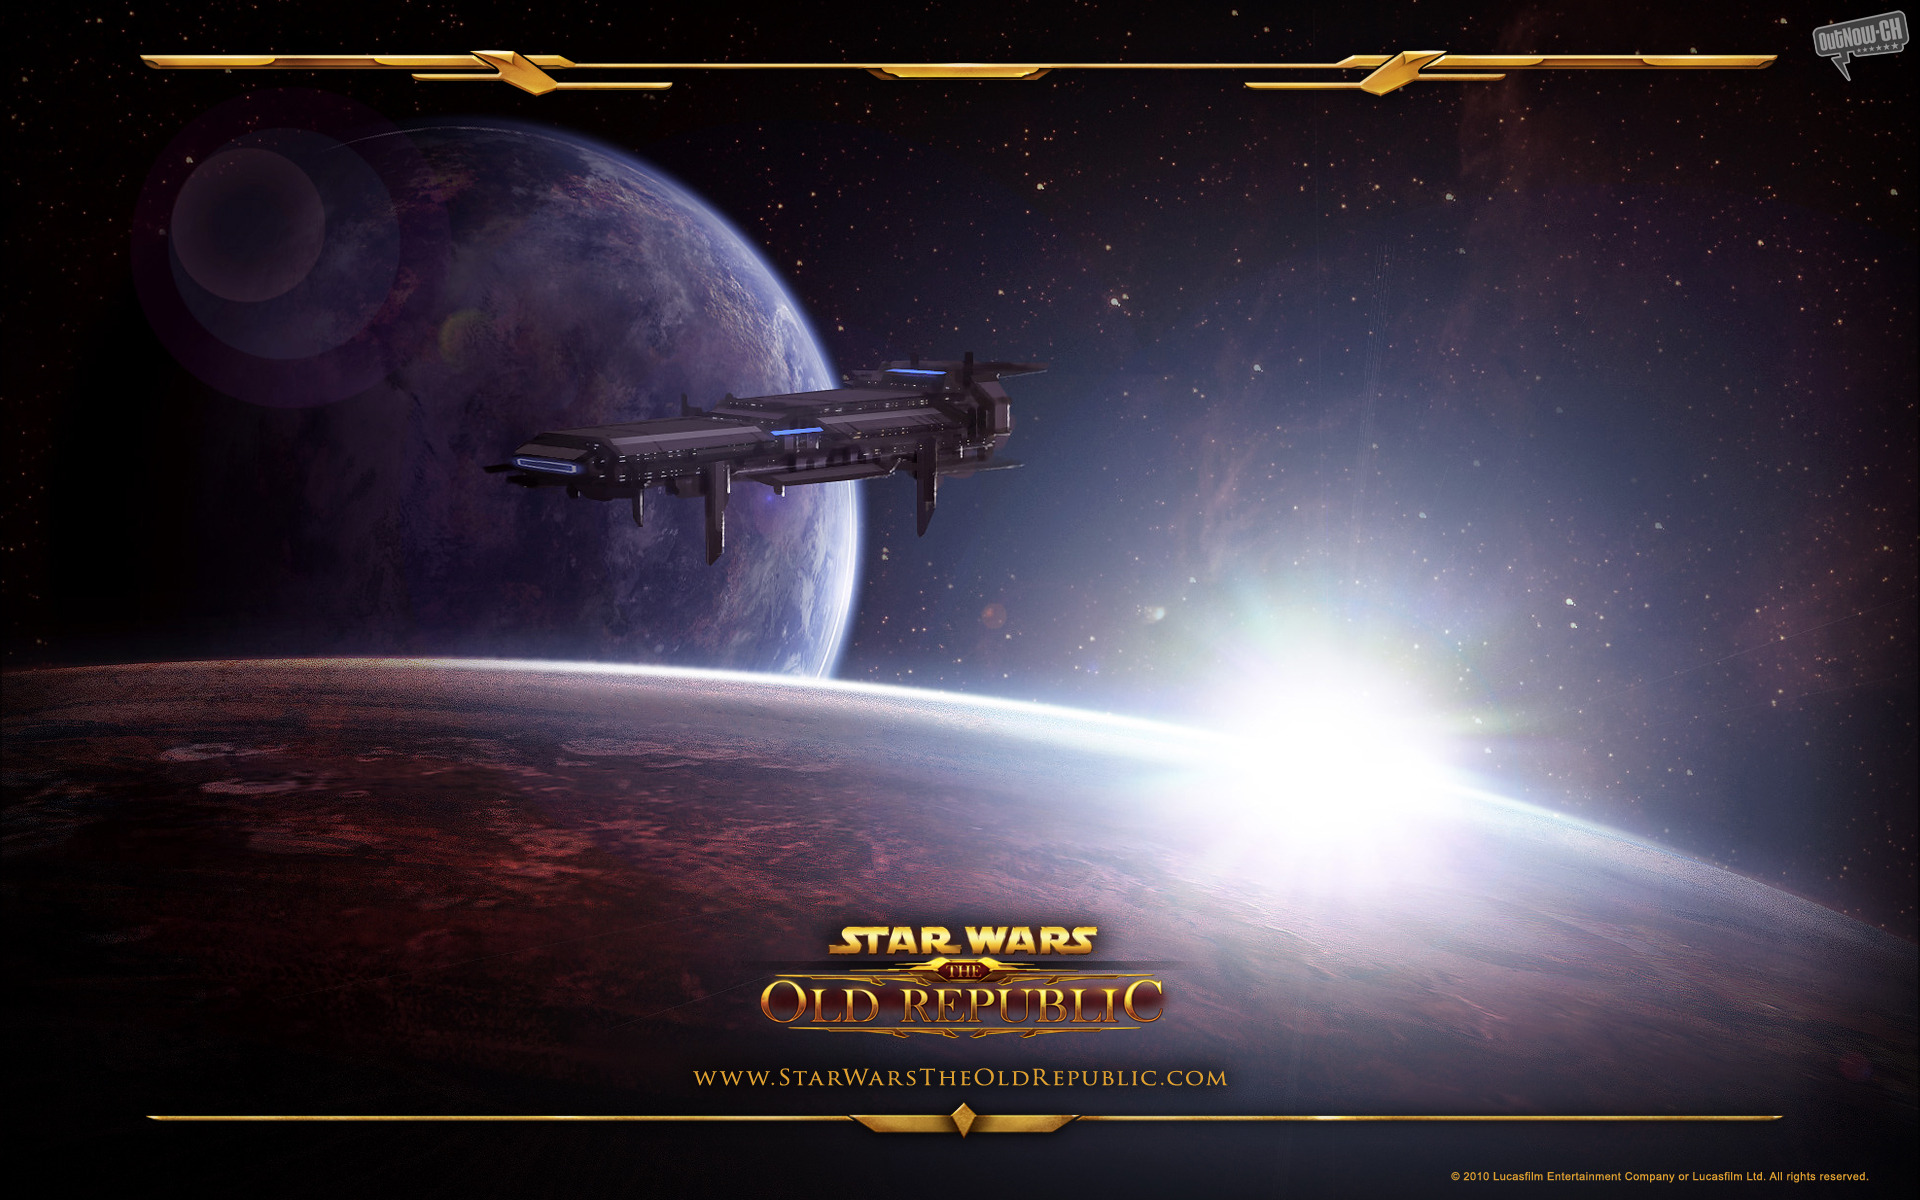 video game, star wars: the old republic, planet, space, spaceship, star wars